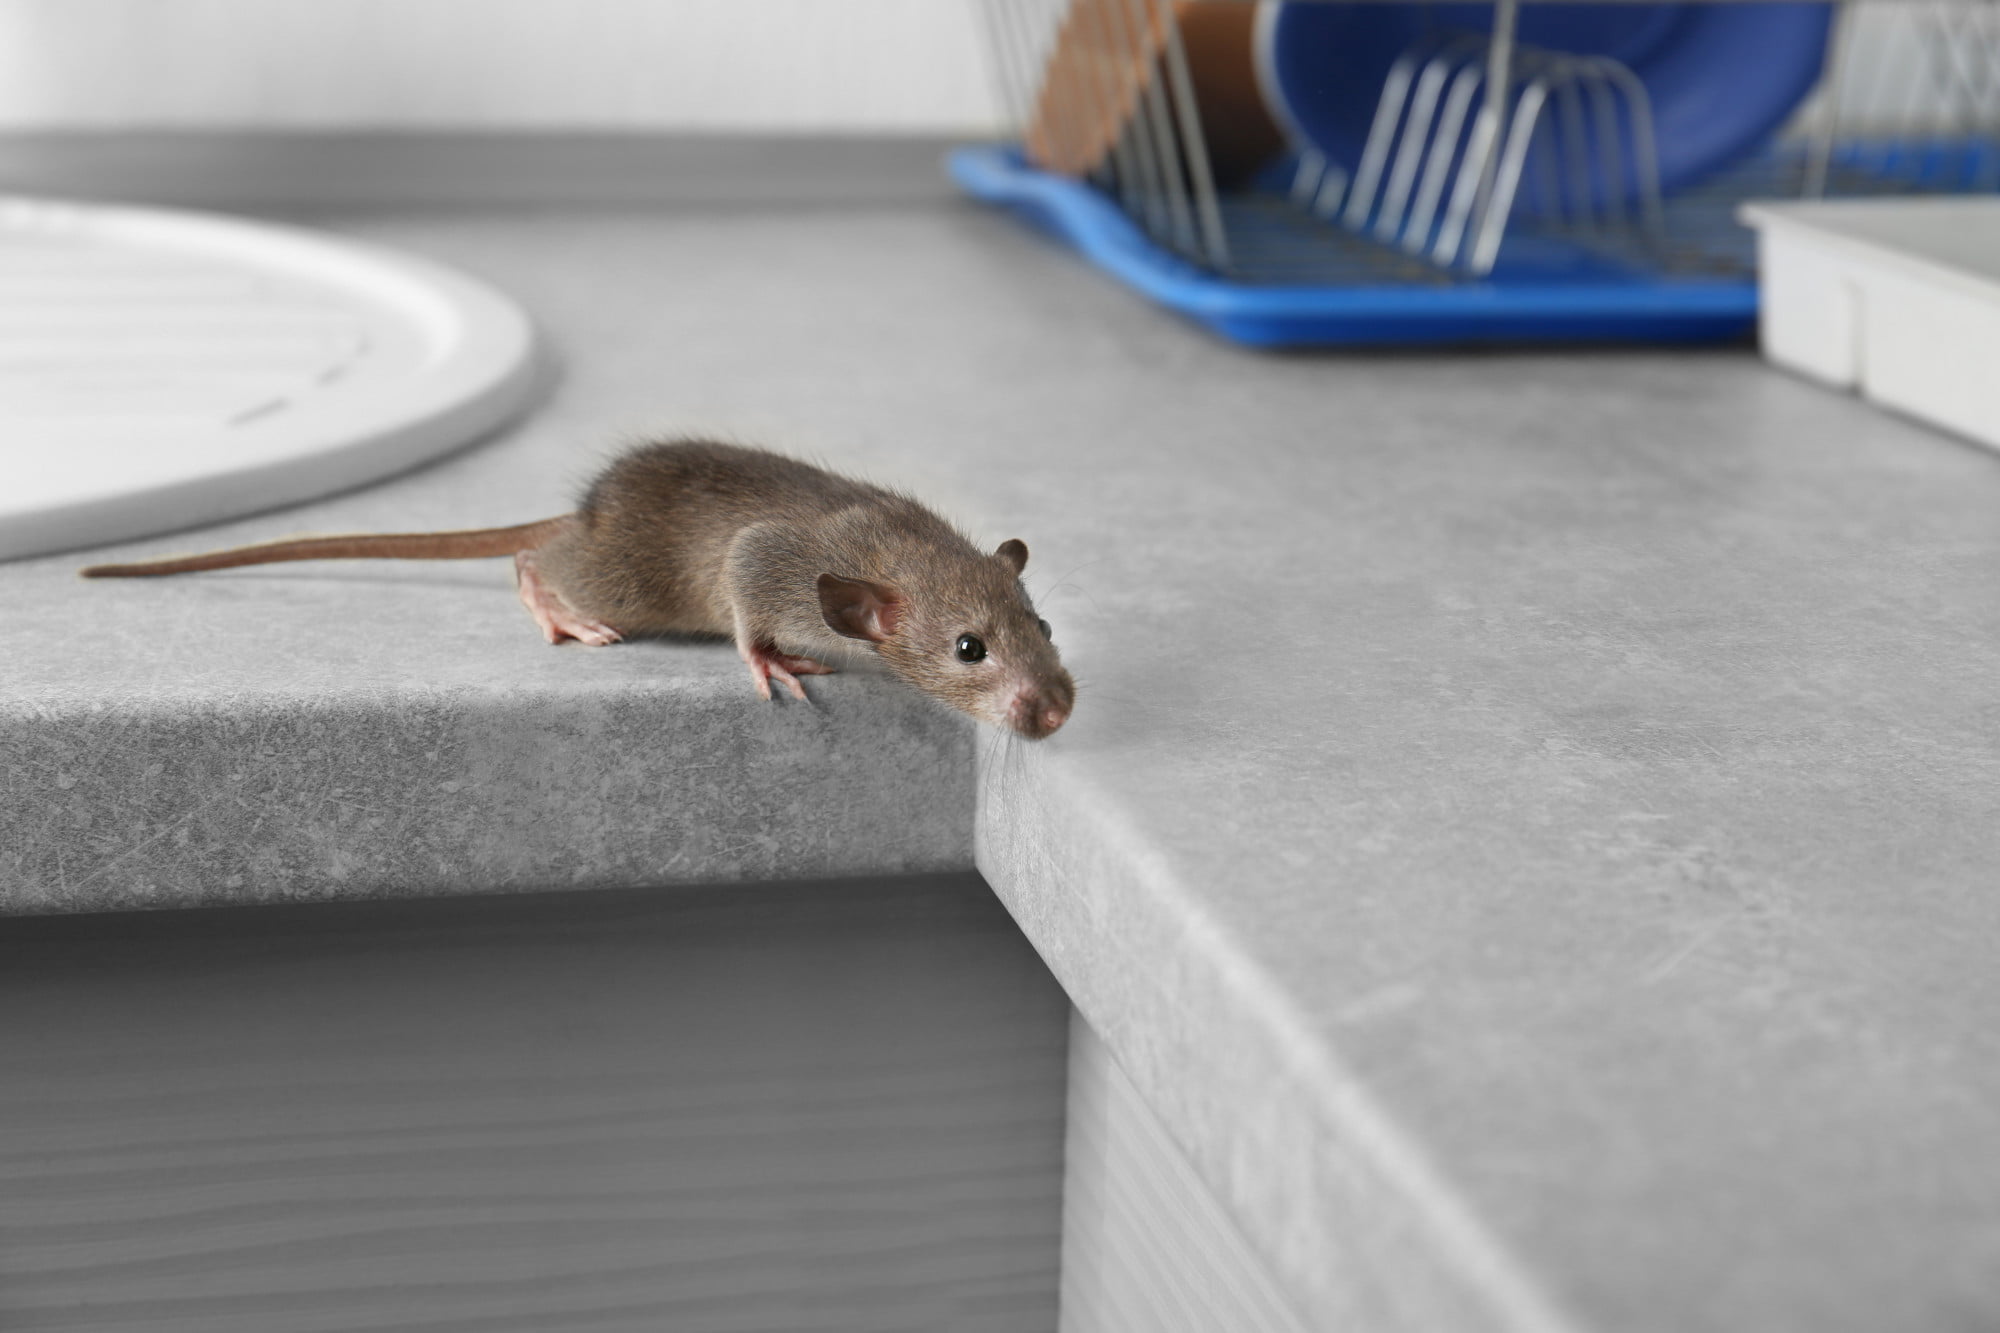 There are several different types of pests that can invade your home. Keep reading to learn more about what to keep an eye on.